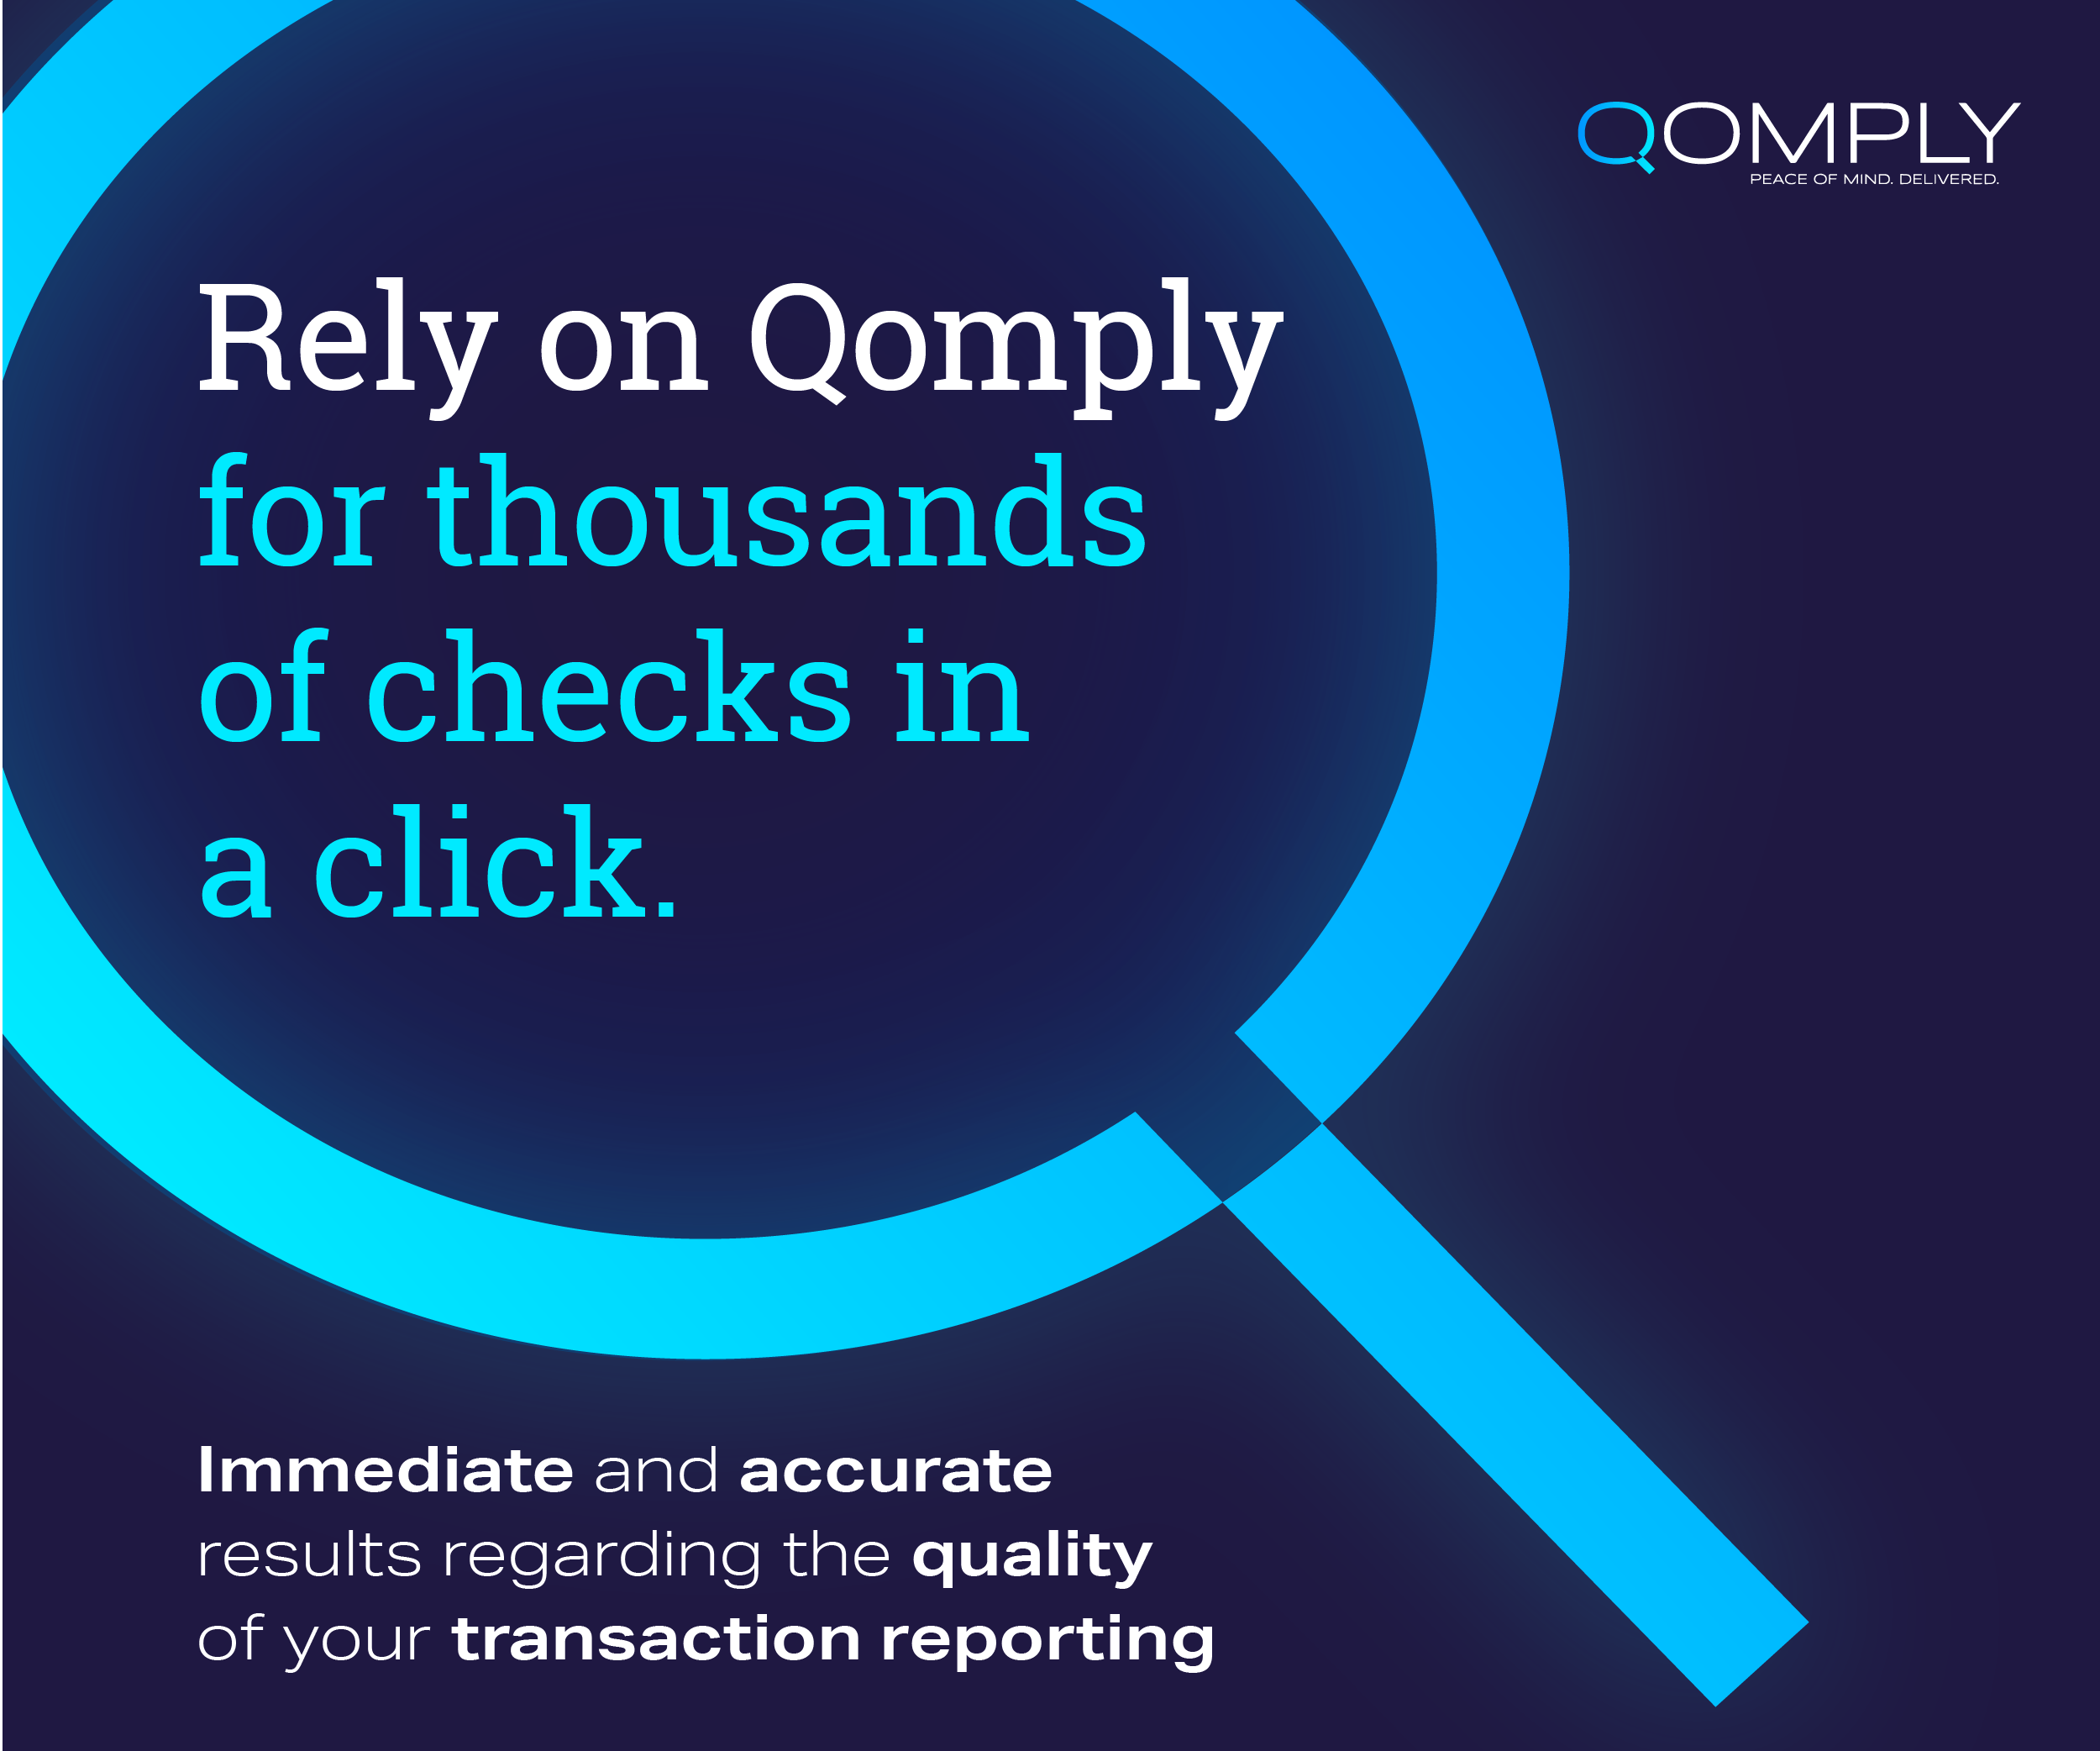 The Qomply Trade Reconciler for MiFID II performs trade reconciliations across large data sets